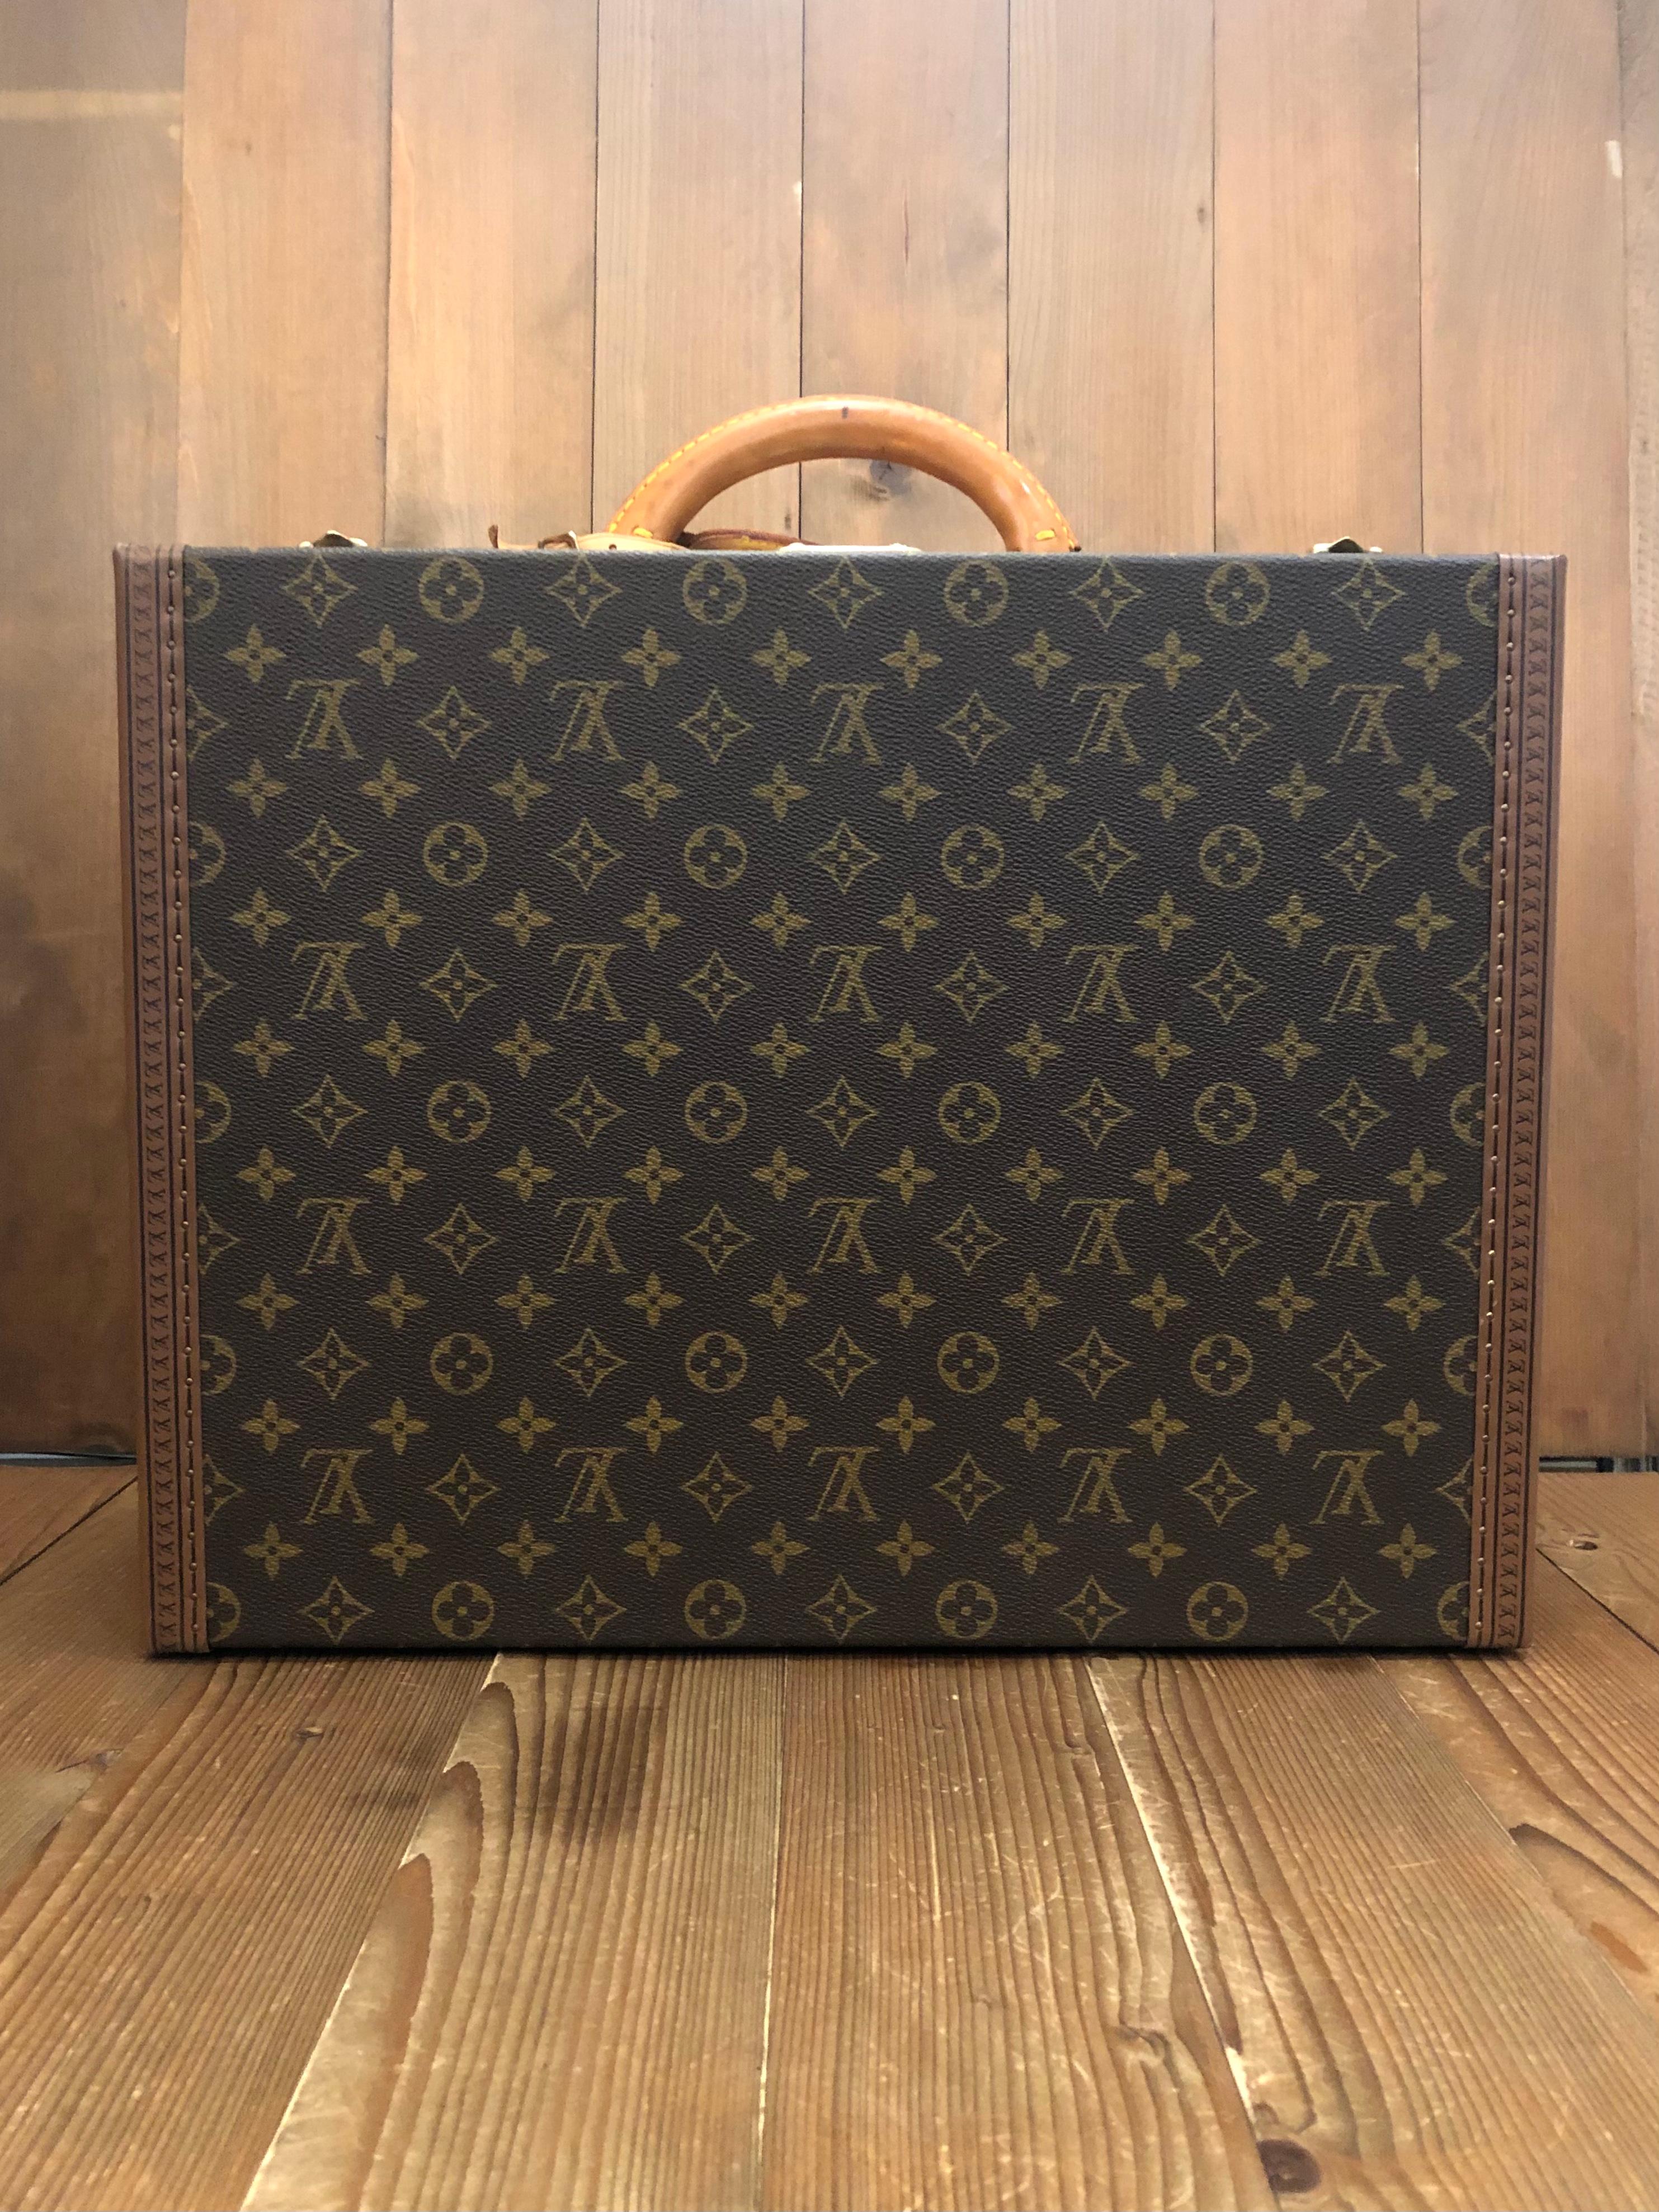 1999 LOUIS VUITTON Super President trunk case in monogram canvas and vachetta leather. Made in France with Date code AS 0959. Measures approximately 17.5 x 13.5 x 6.75 inches. No key.

Condition: Minor signs of use. Generally in very good